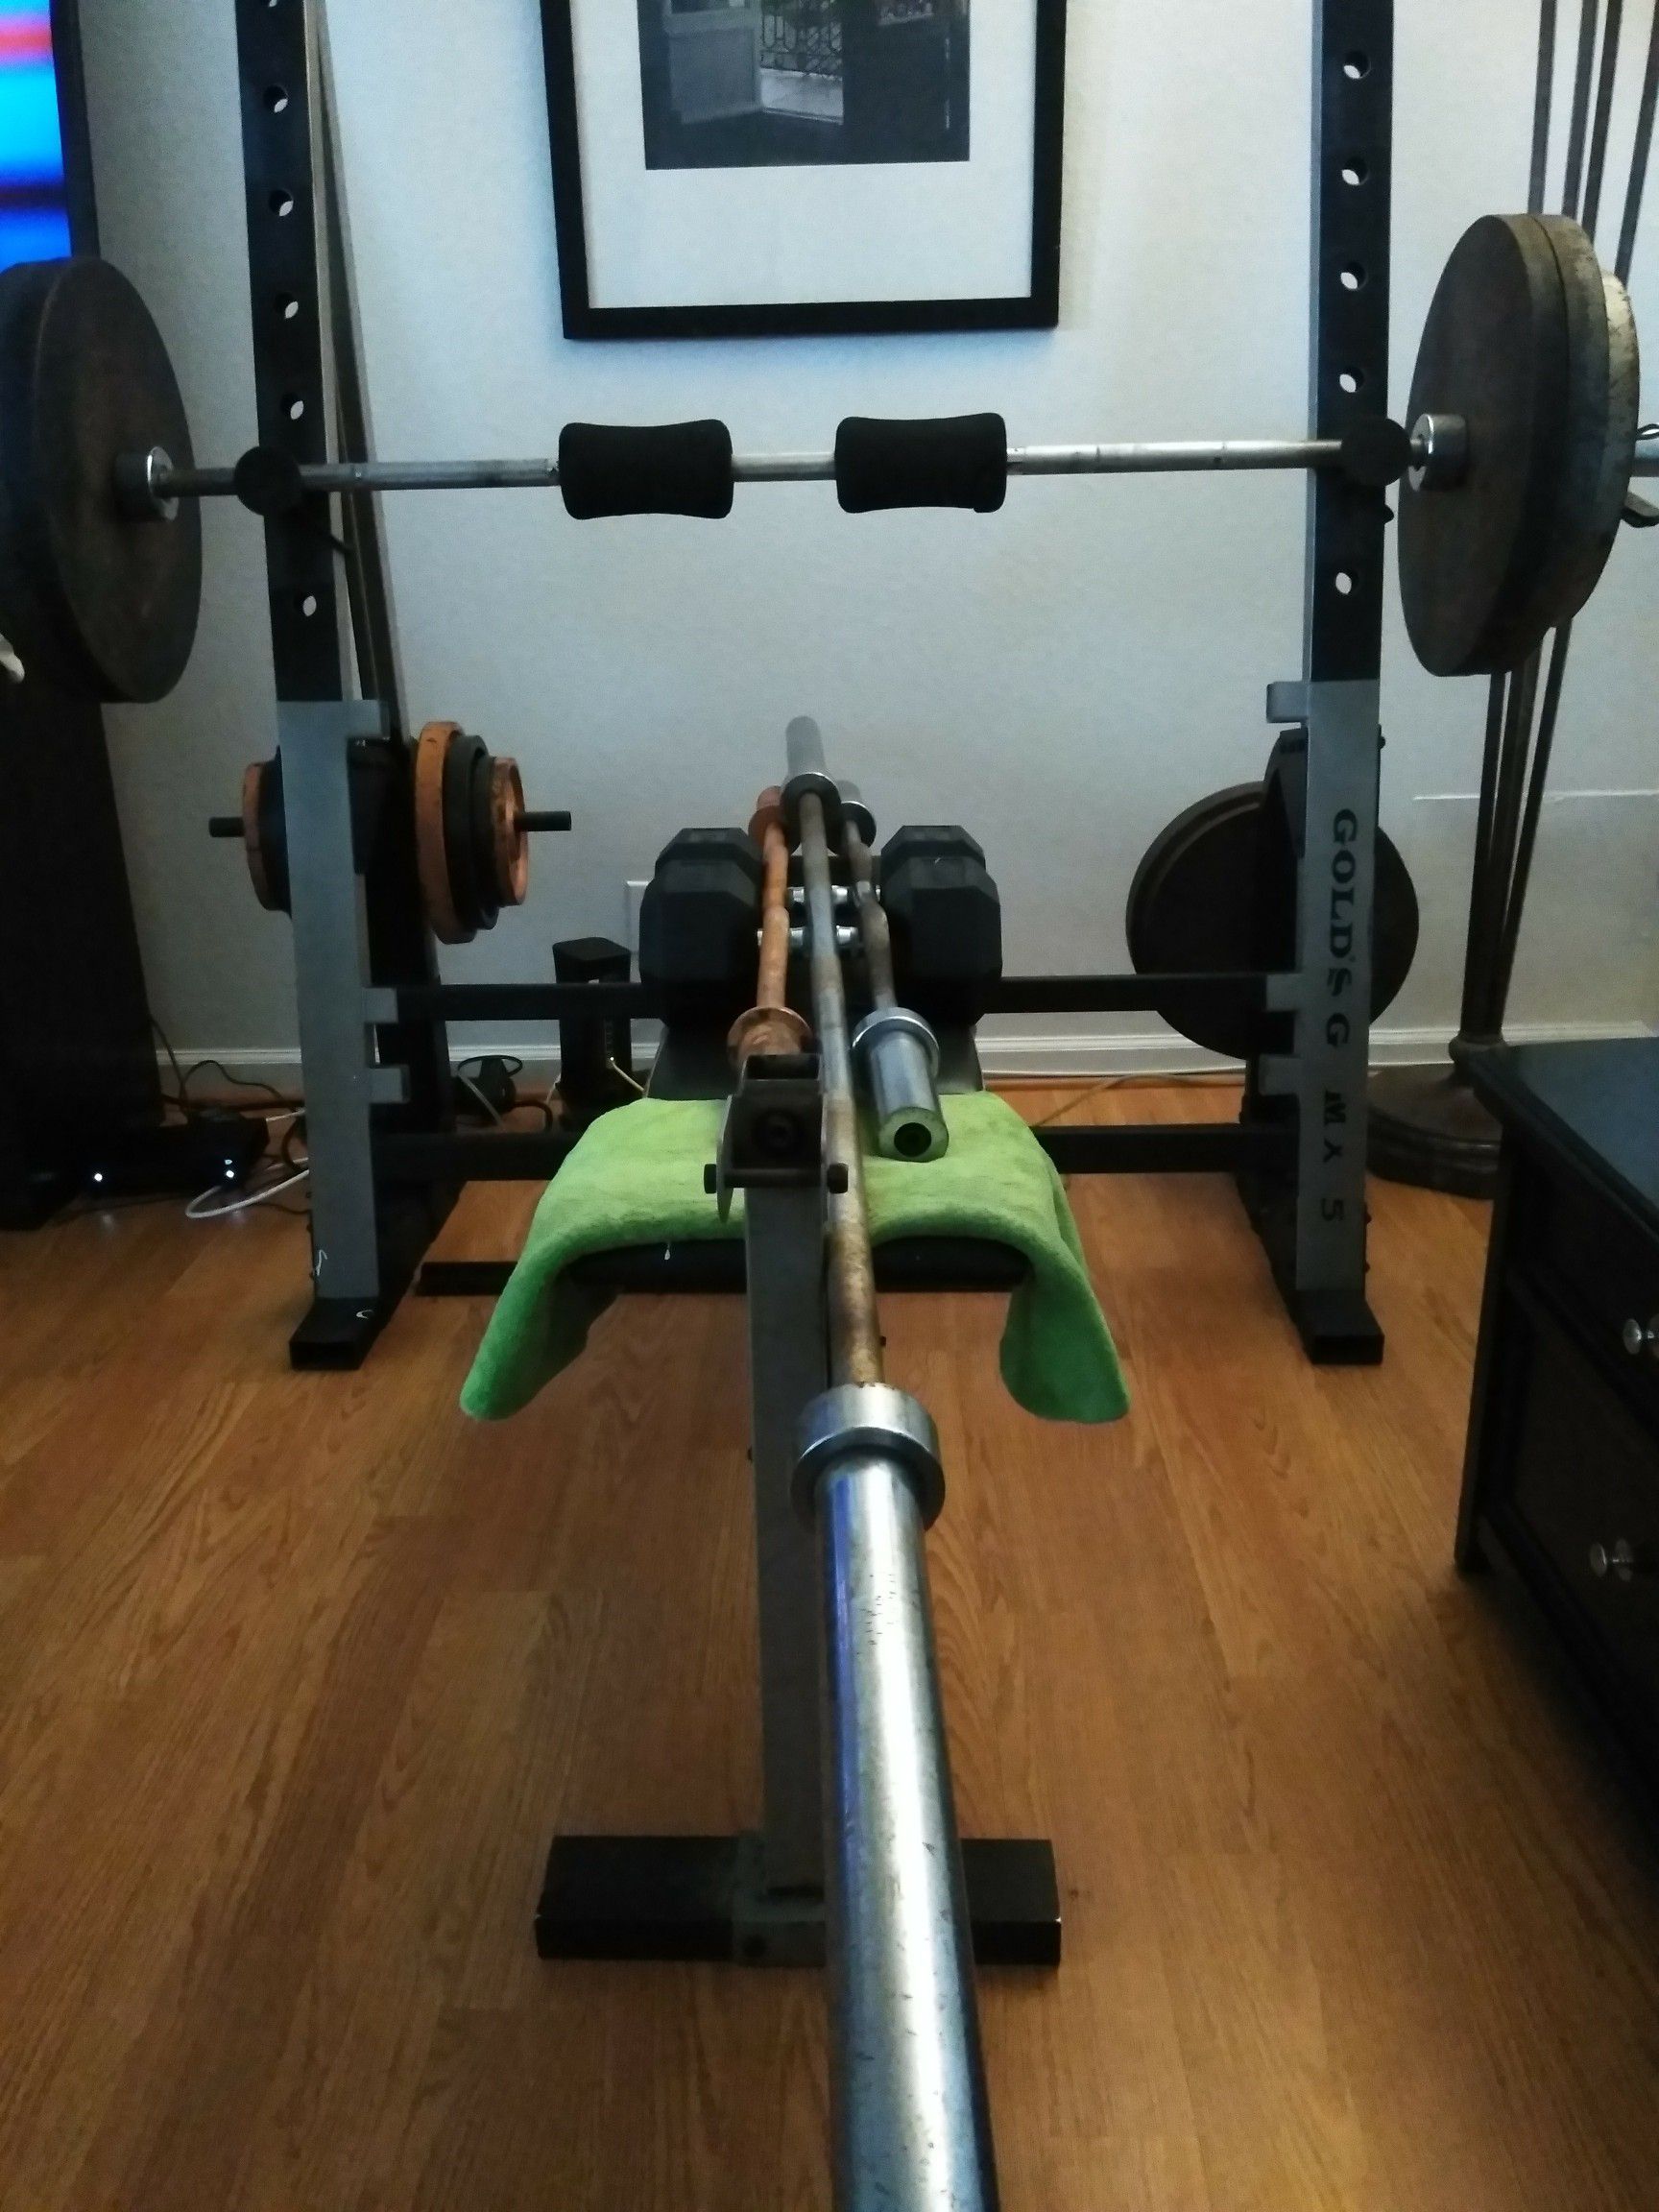 500 lbs weights.. Bench included.. curling bar and Olympic bar